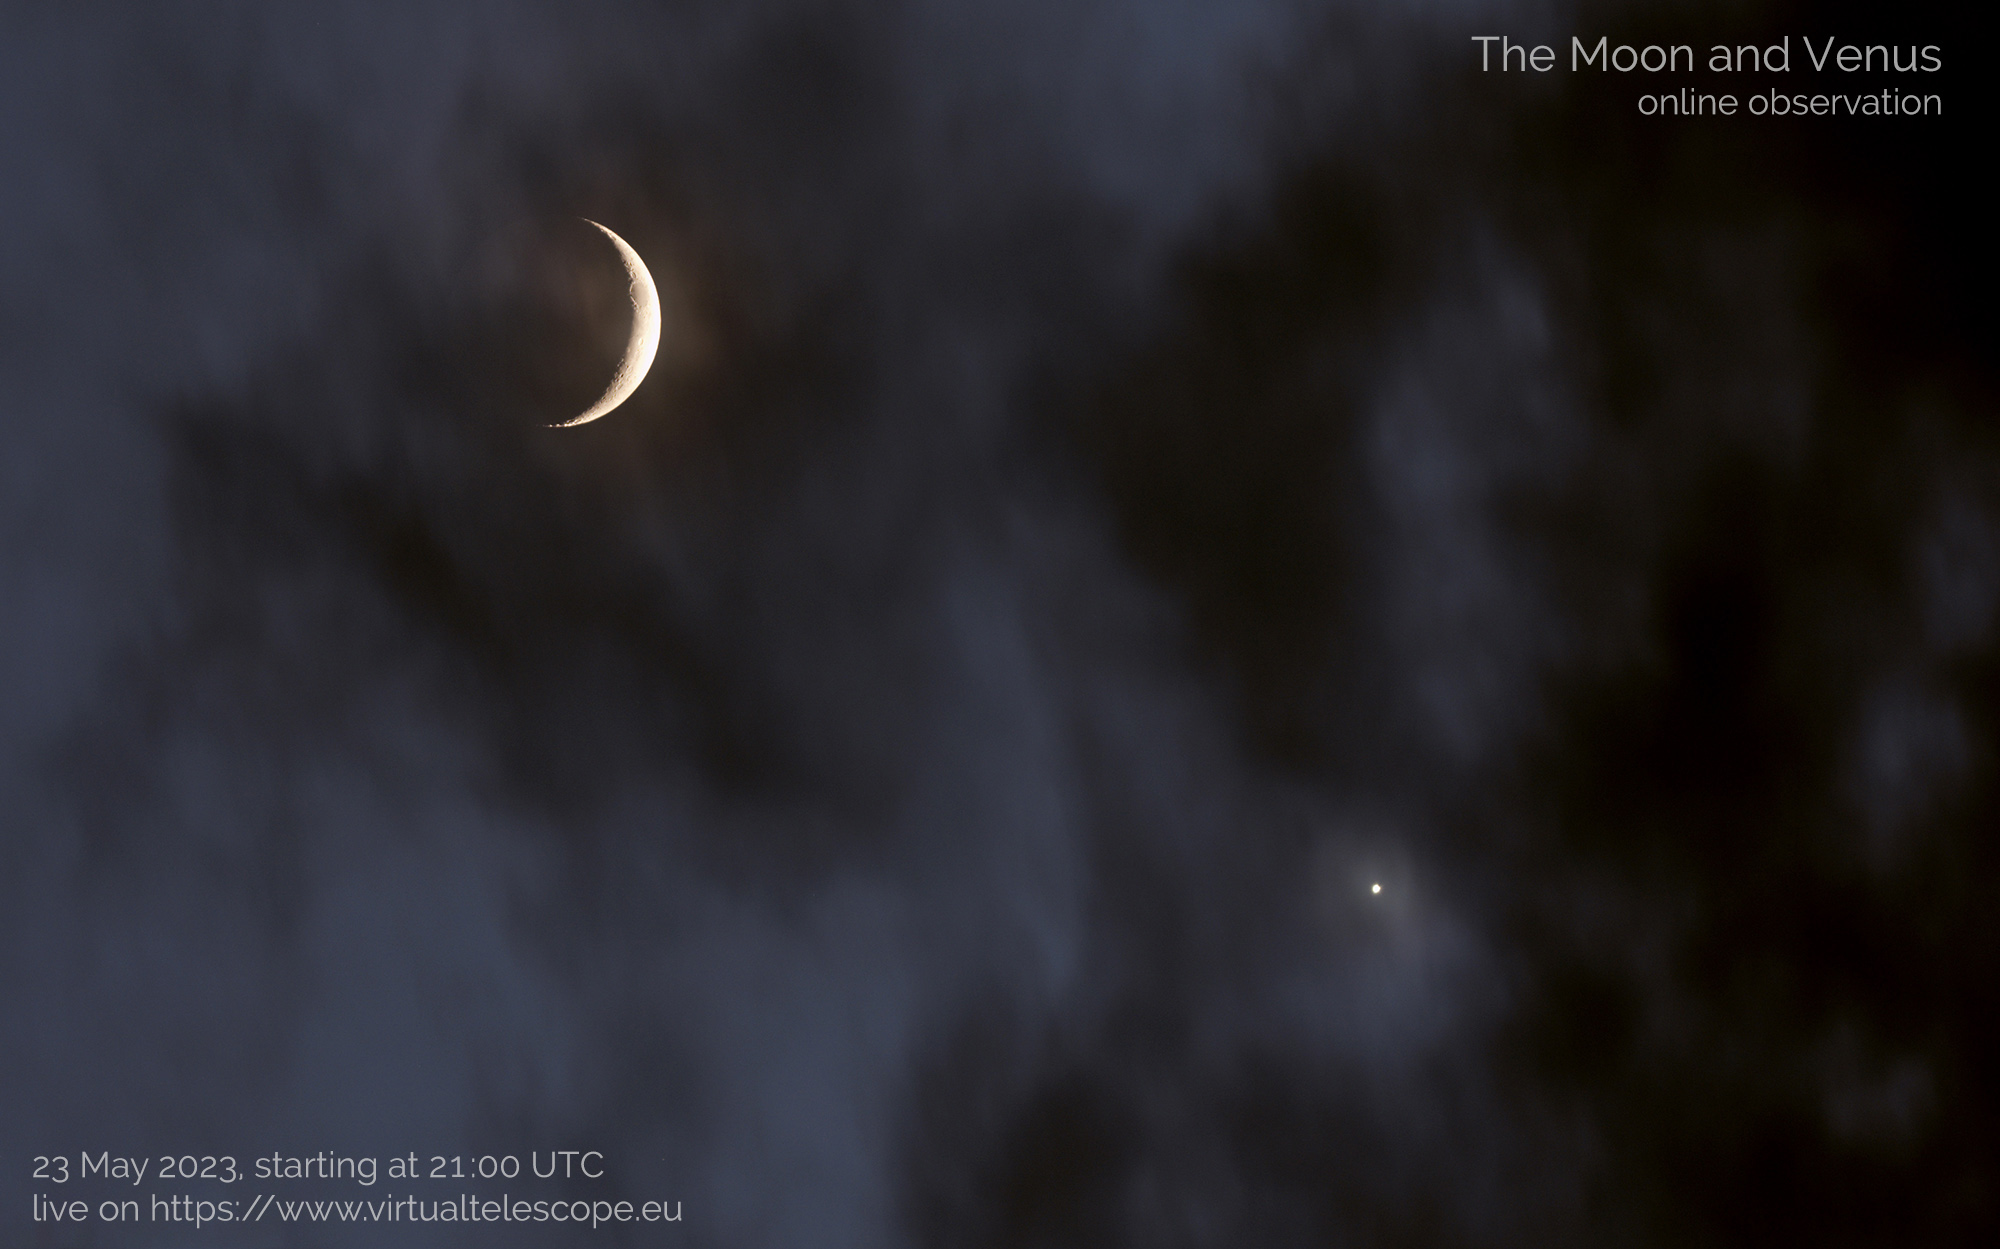 The Moon and Venus: poster of the event.